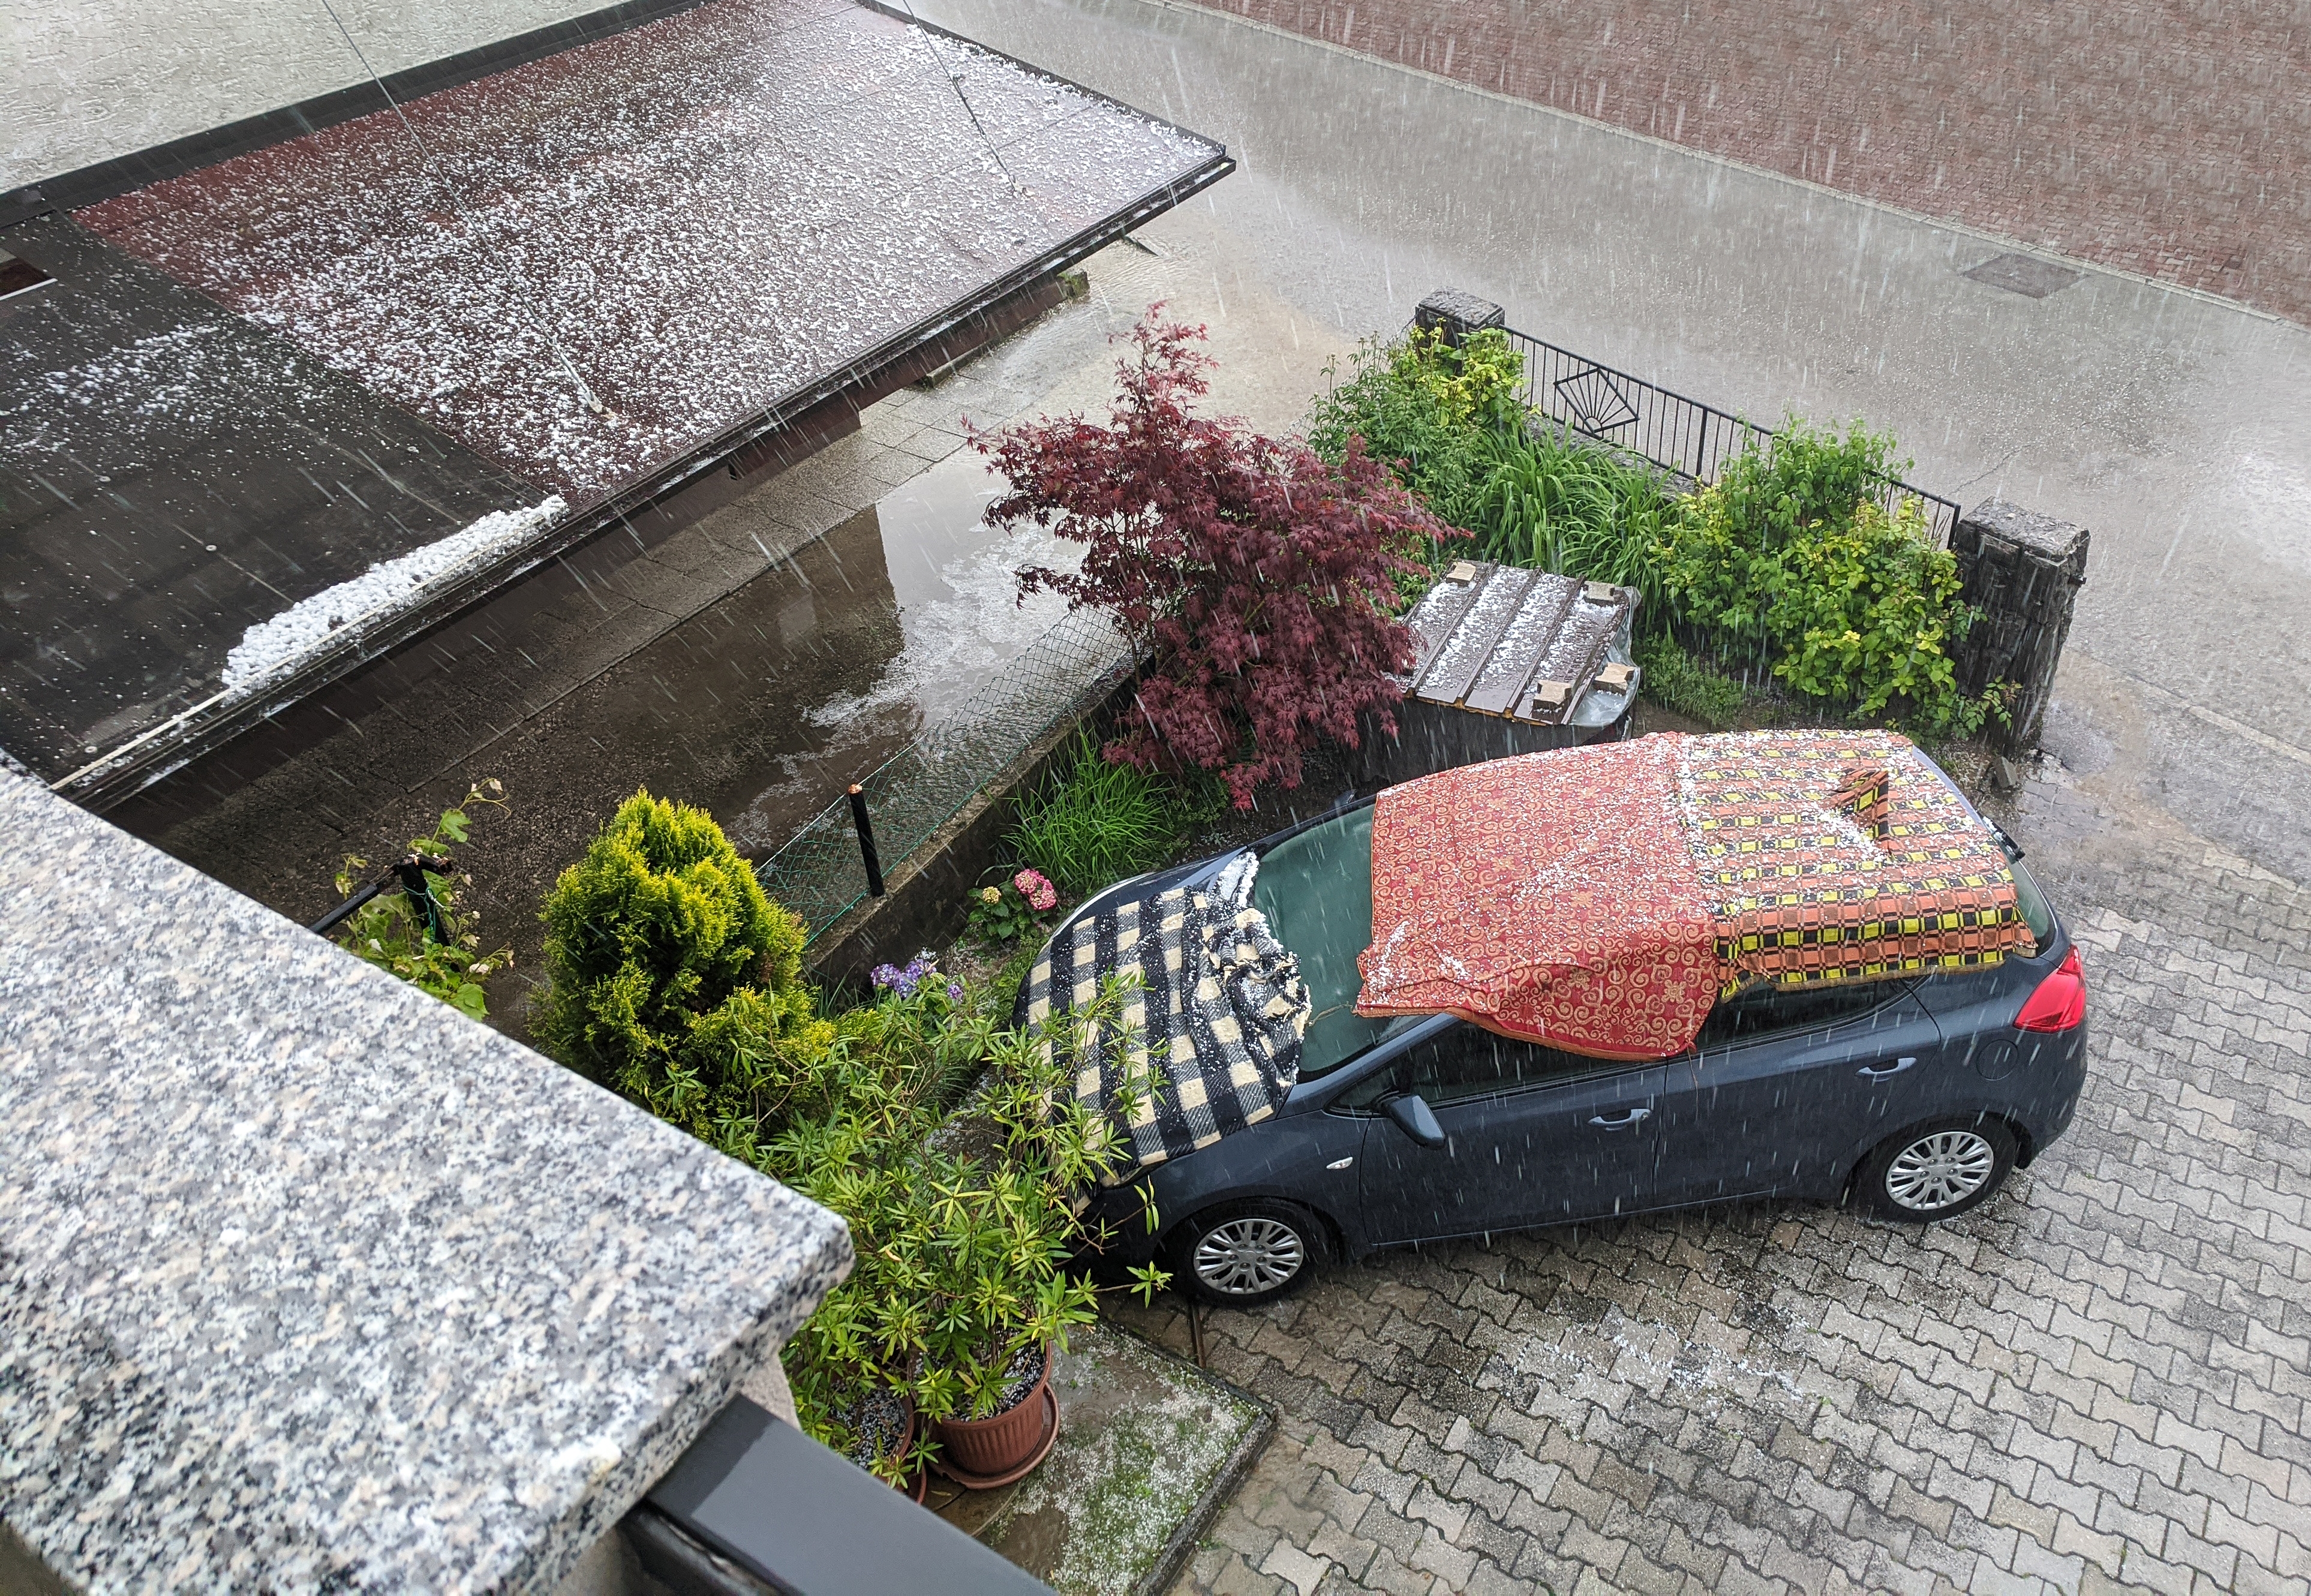 You can use blankets to try to protect your car from hail if you can't park in a garage, and don't have a hail car cover.